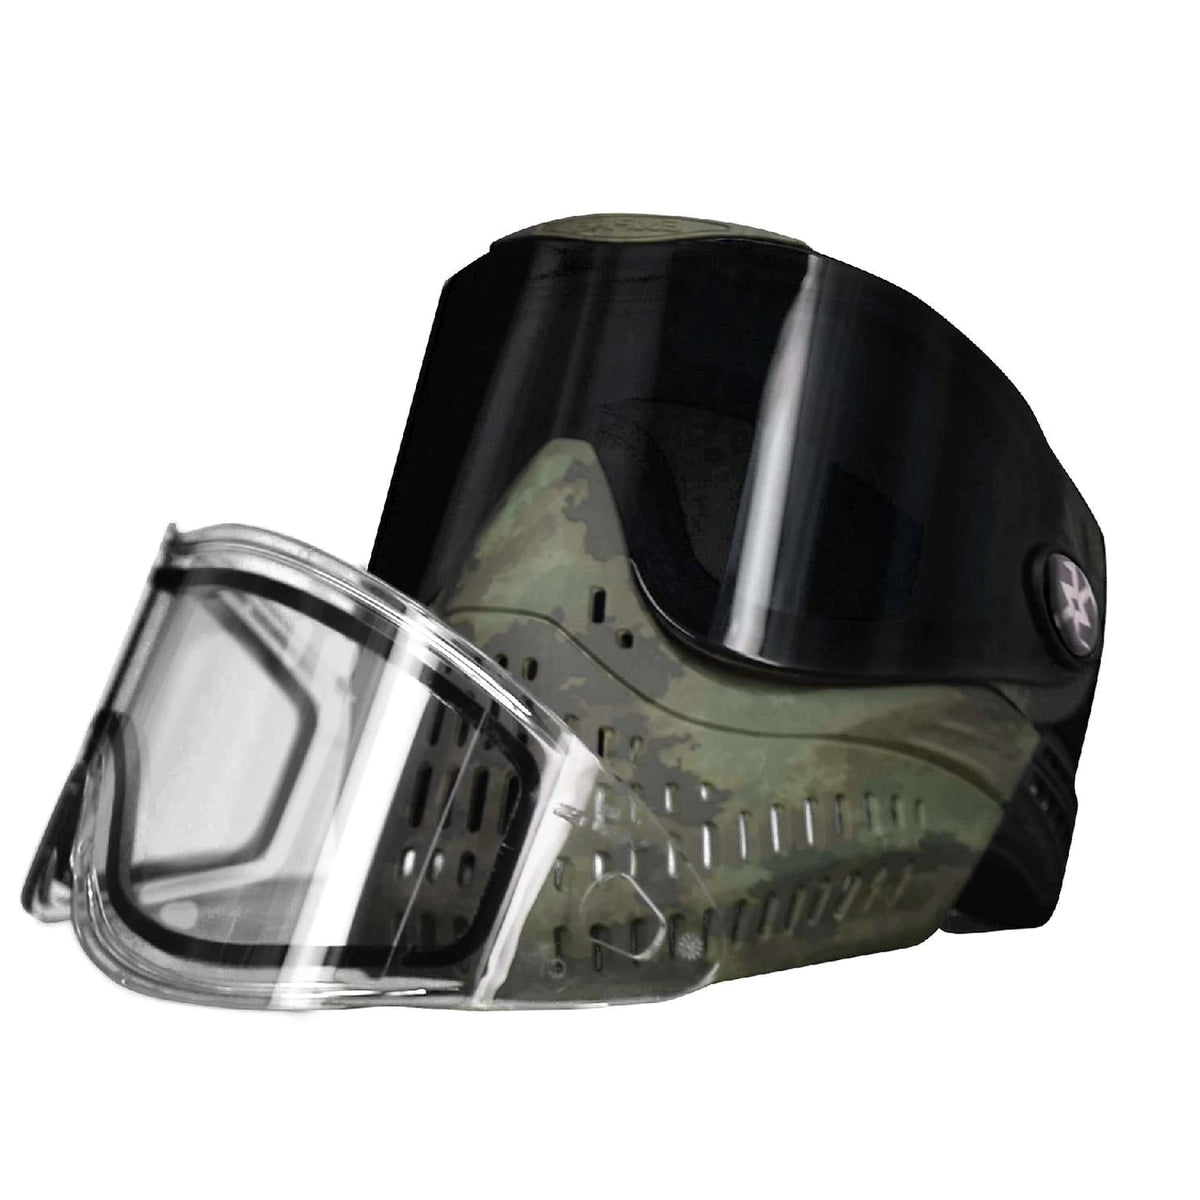 Paintball Goggle and lens